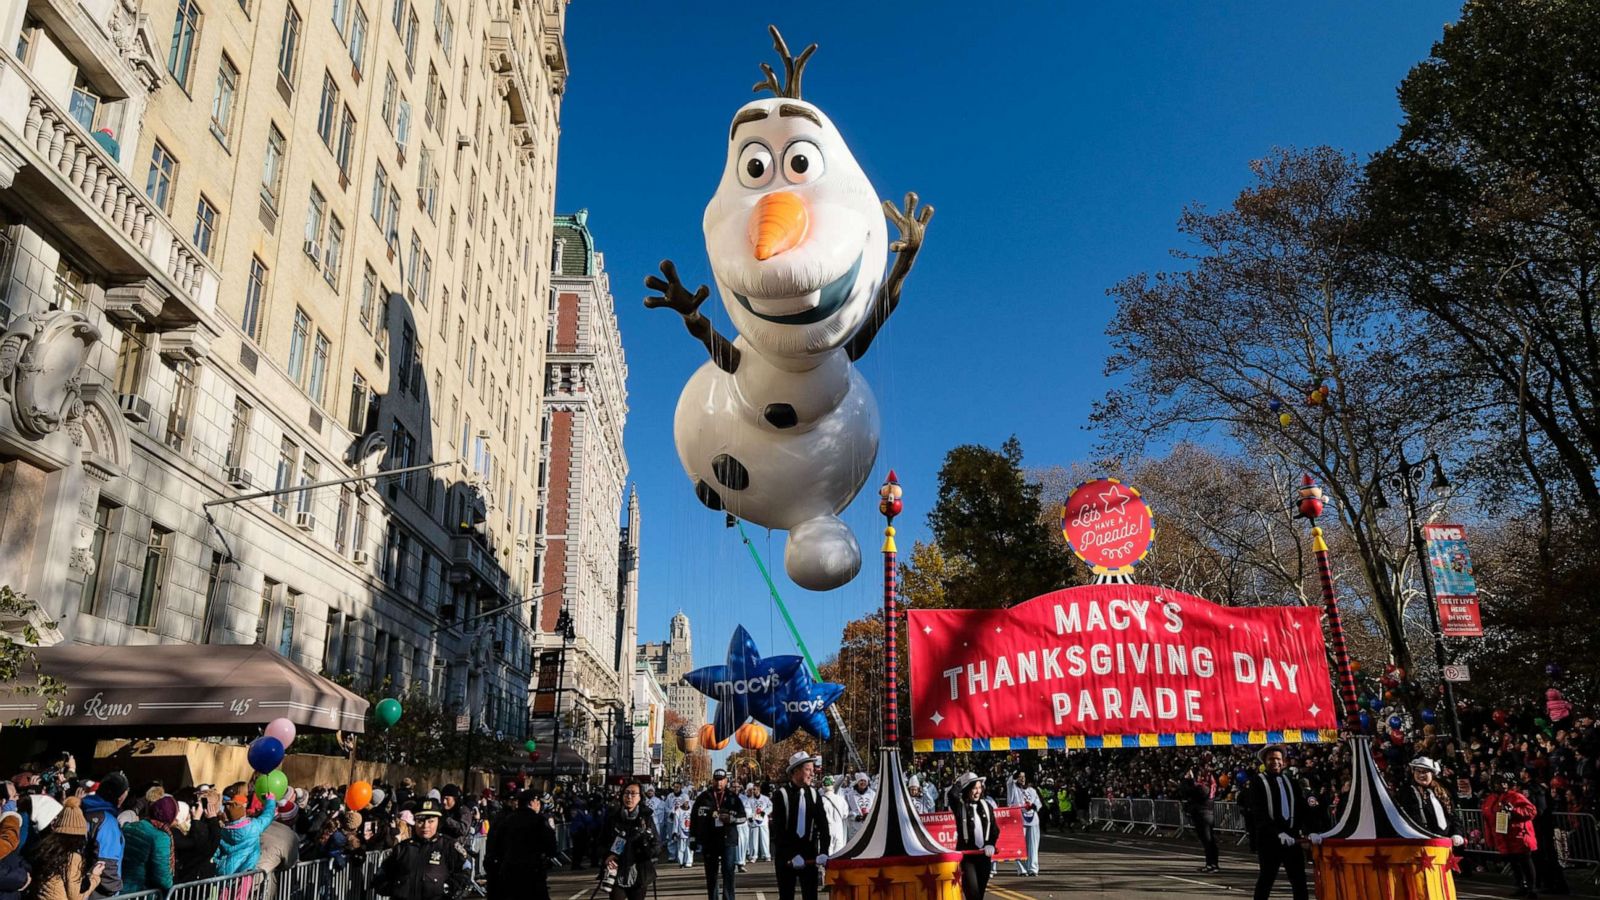 Macy's iconic Thanksgiving Day Parade balloons are now NFTs - ABC News